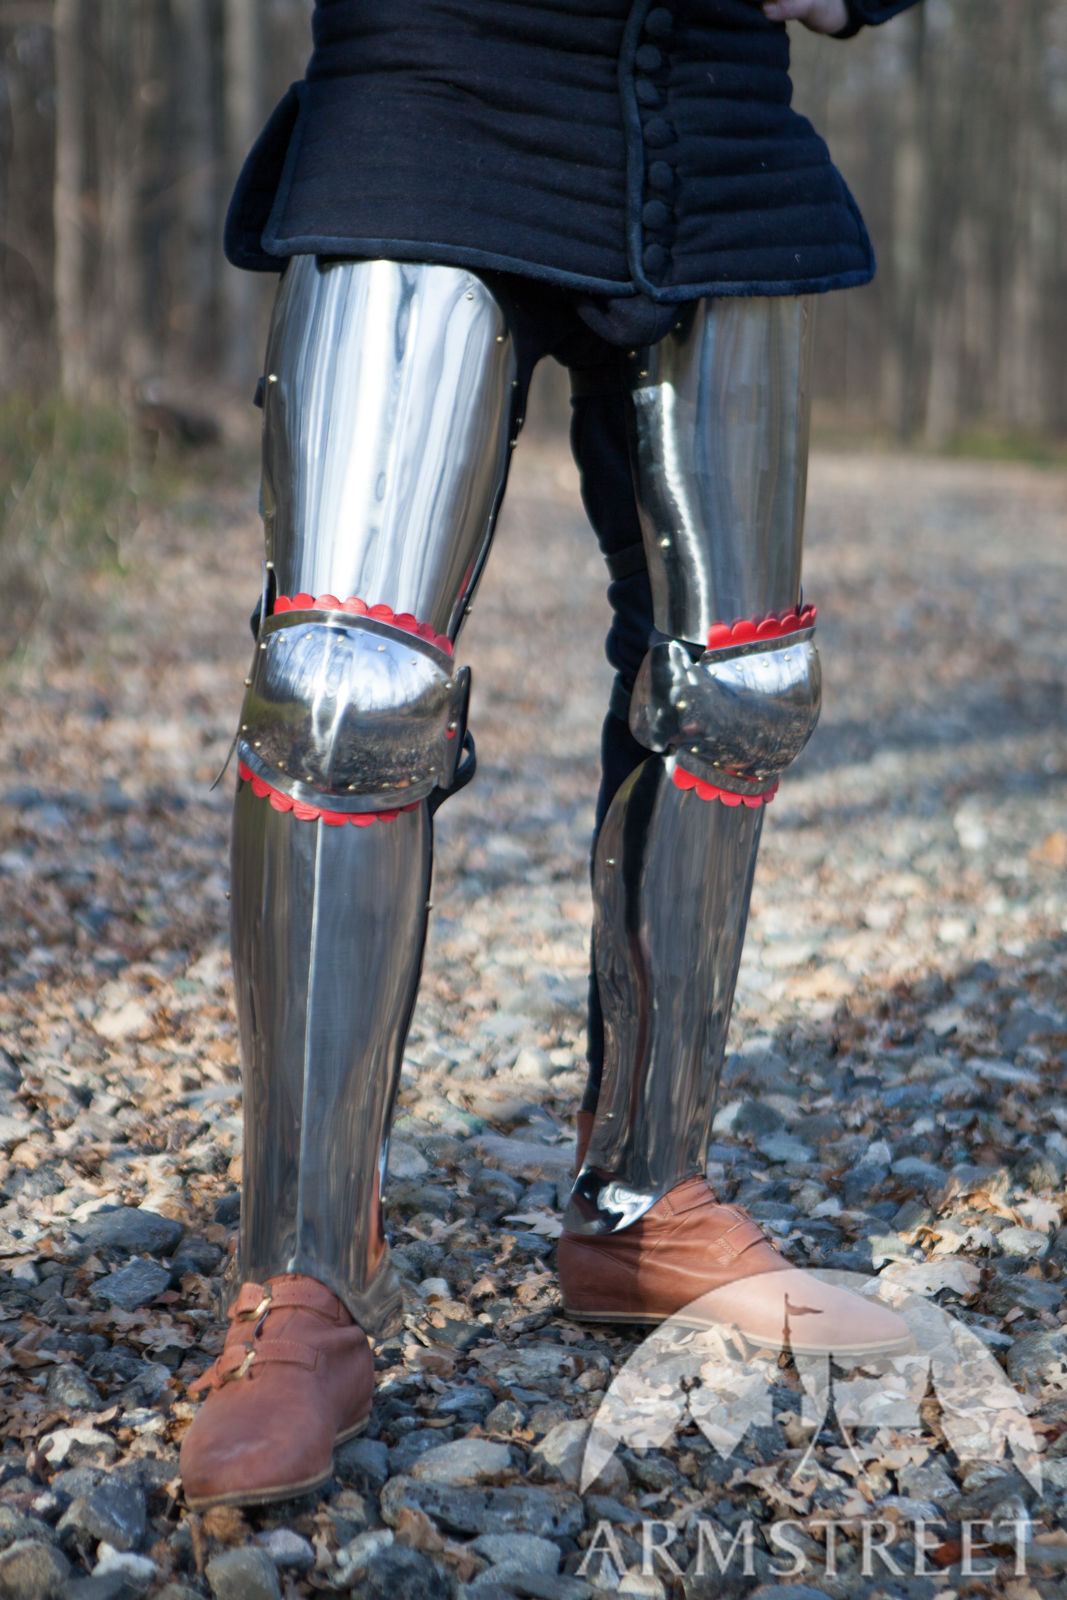 Late XIV century legs armor kit: greaves, knee cops and cuisses